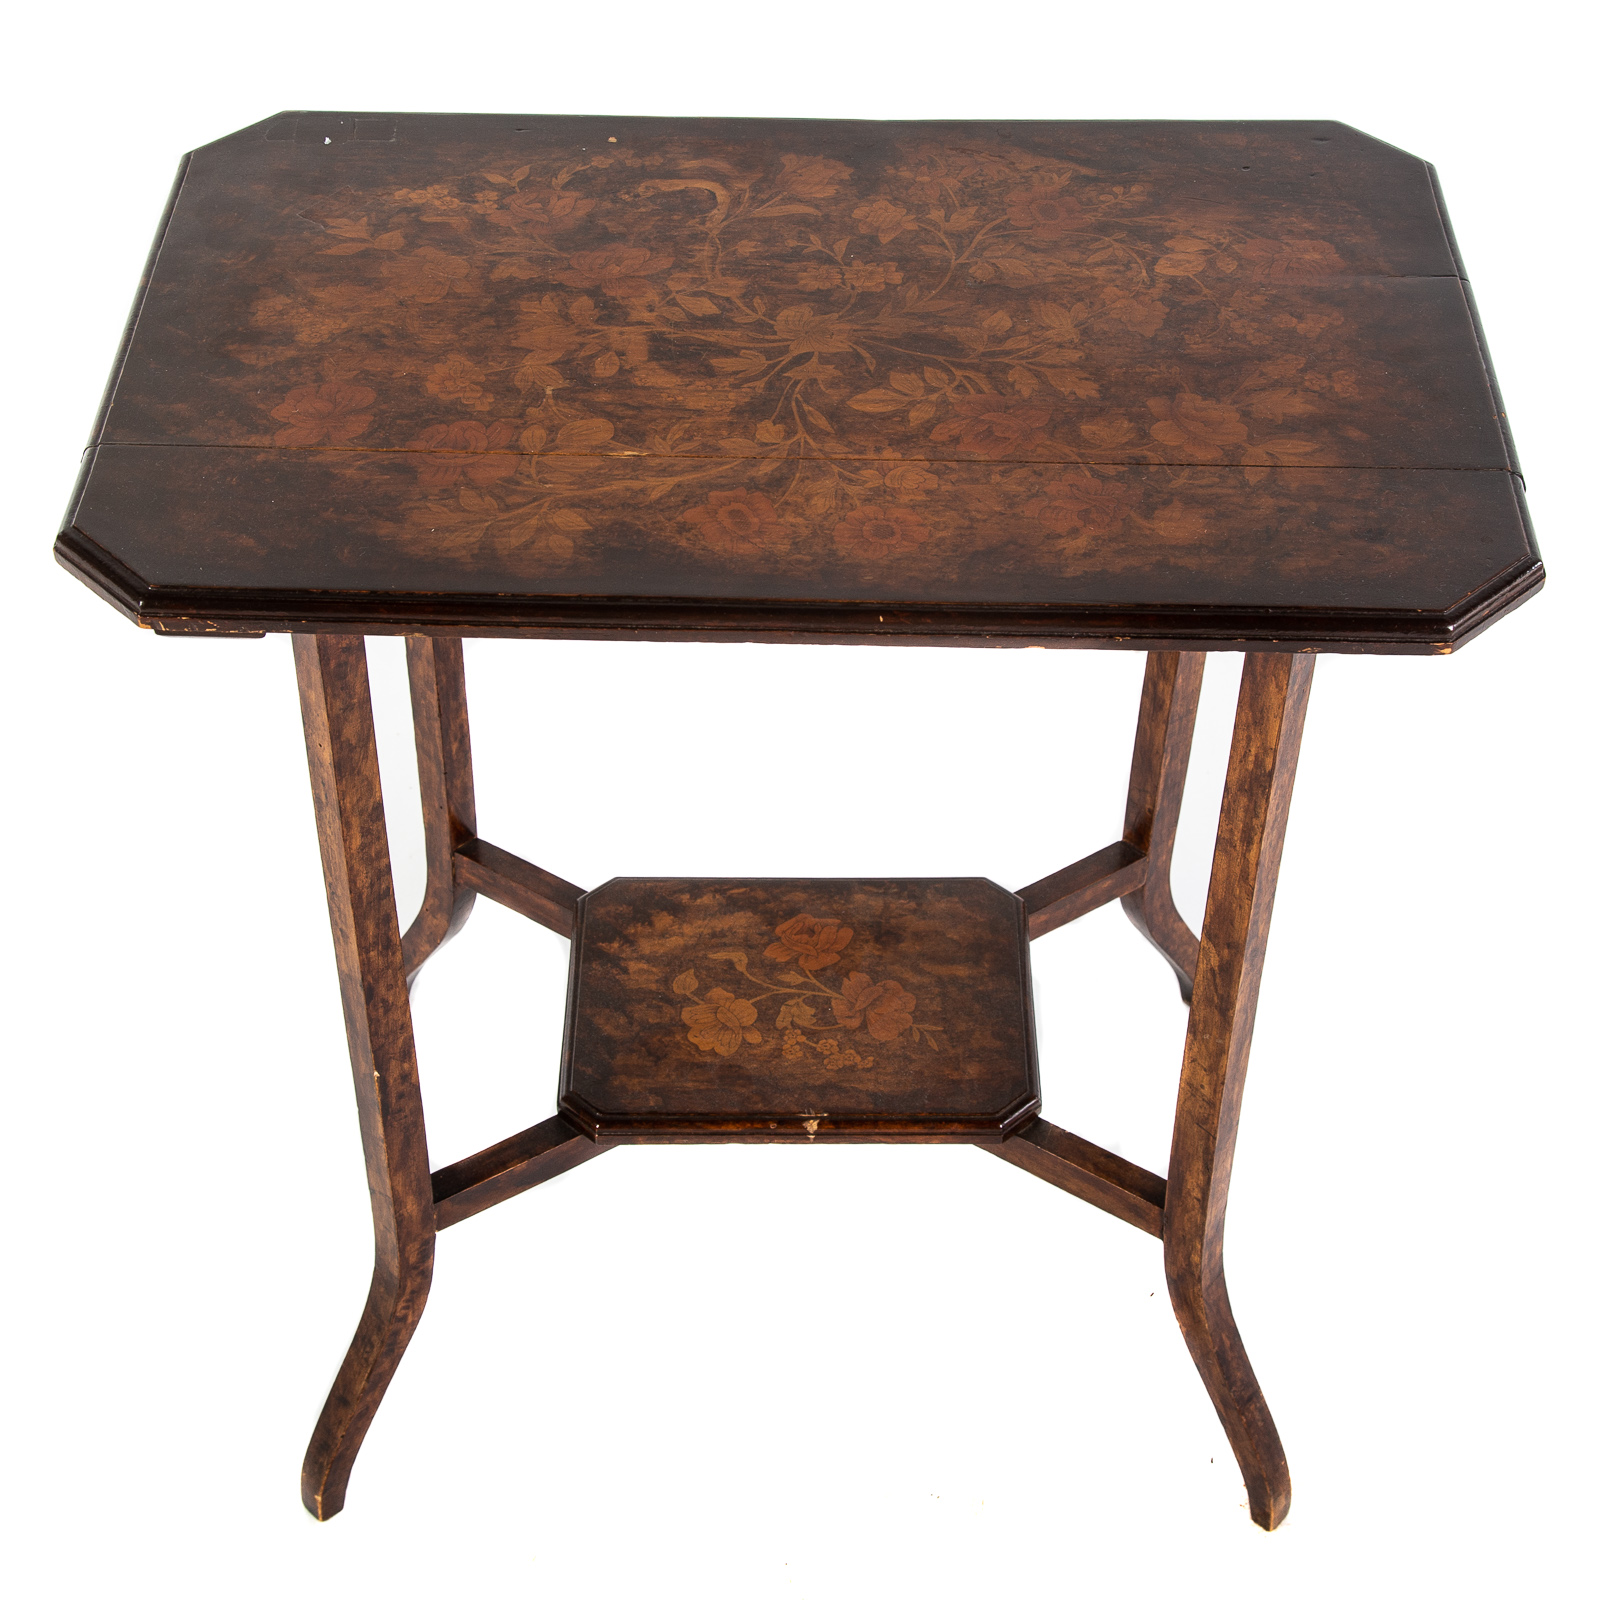 DUTCH STYLE INLAID MARQUETRY SIDE 29e8dc